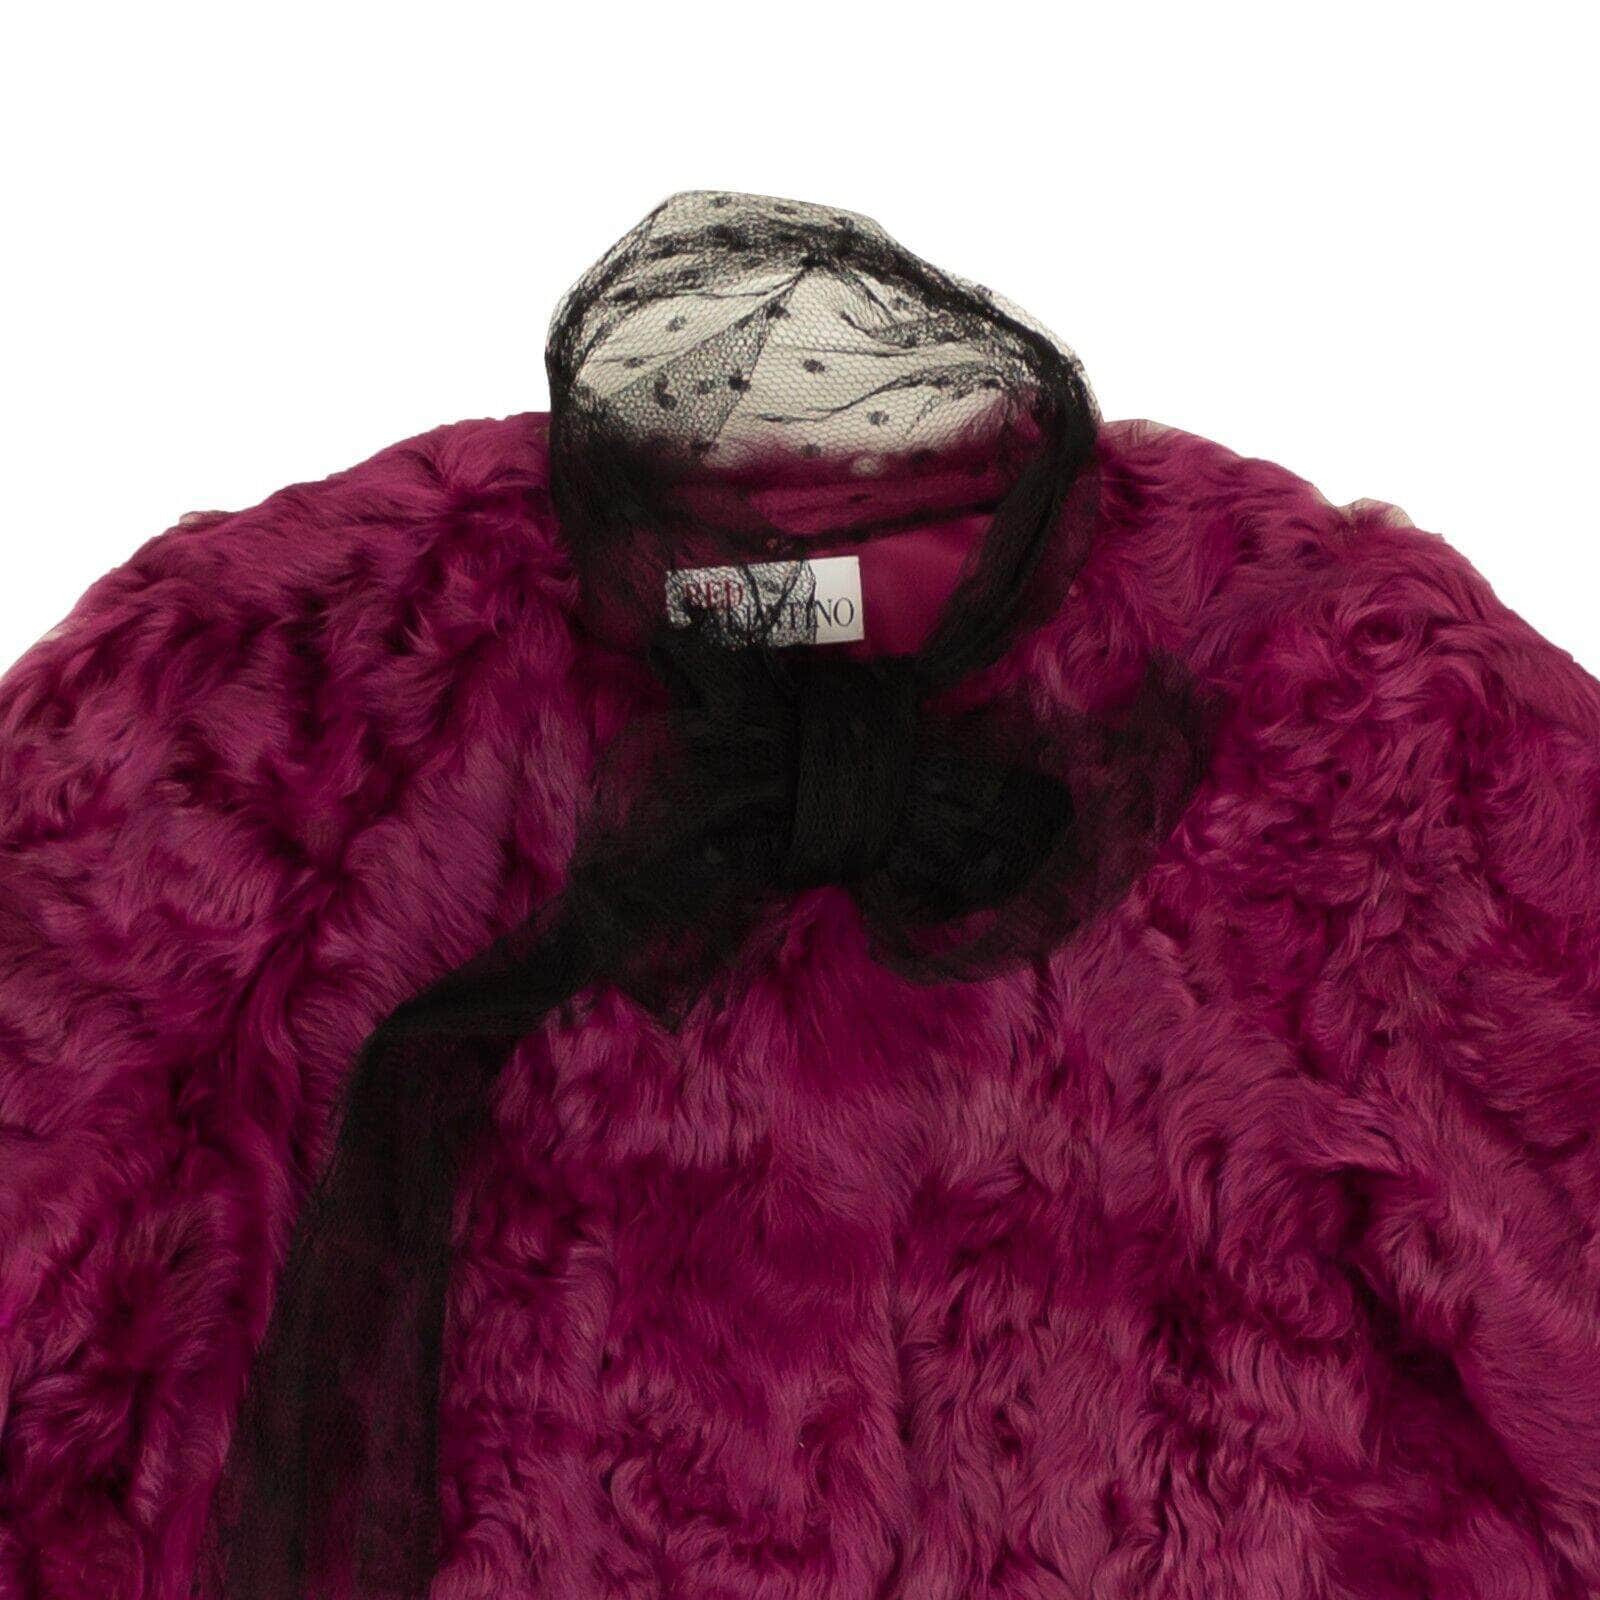 Red Valentino 1000-2000, channelenable-all, chicmi, couponcollection, gender-womens, main-clothing, size-40, womens-fur-coats-jackets 40 Fuchsia Tulle Trimmed Cropped Fur Jacket RDV-XOTW-0001/40 RDV-XOTW-0001/40